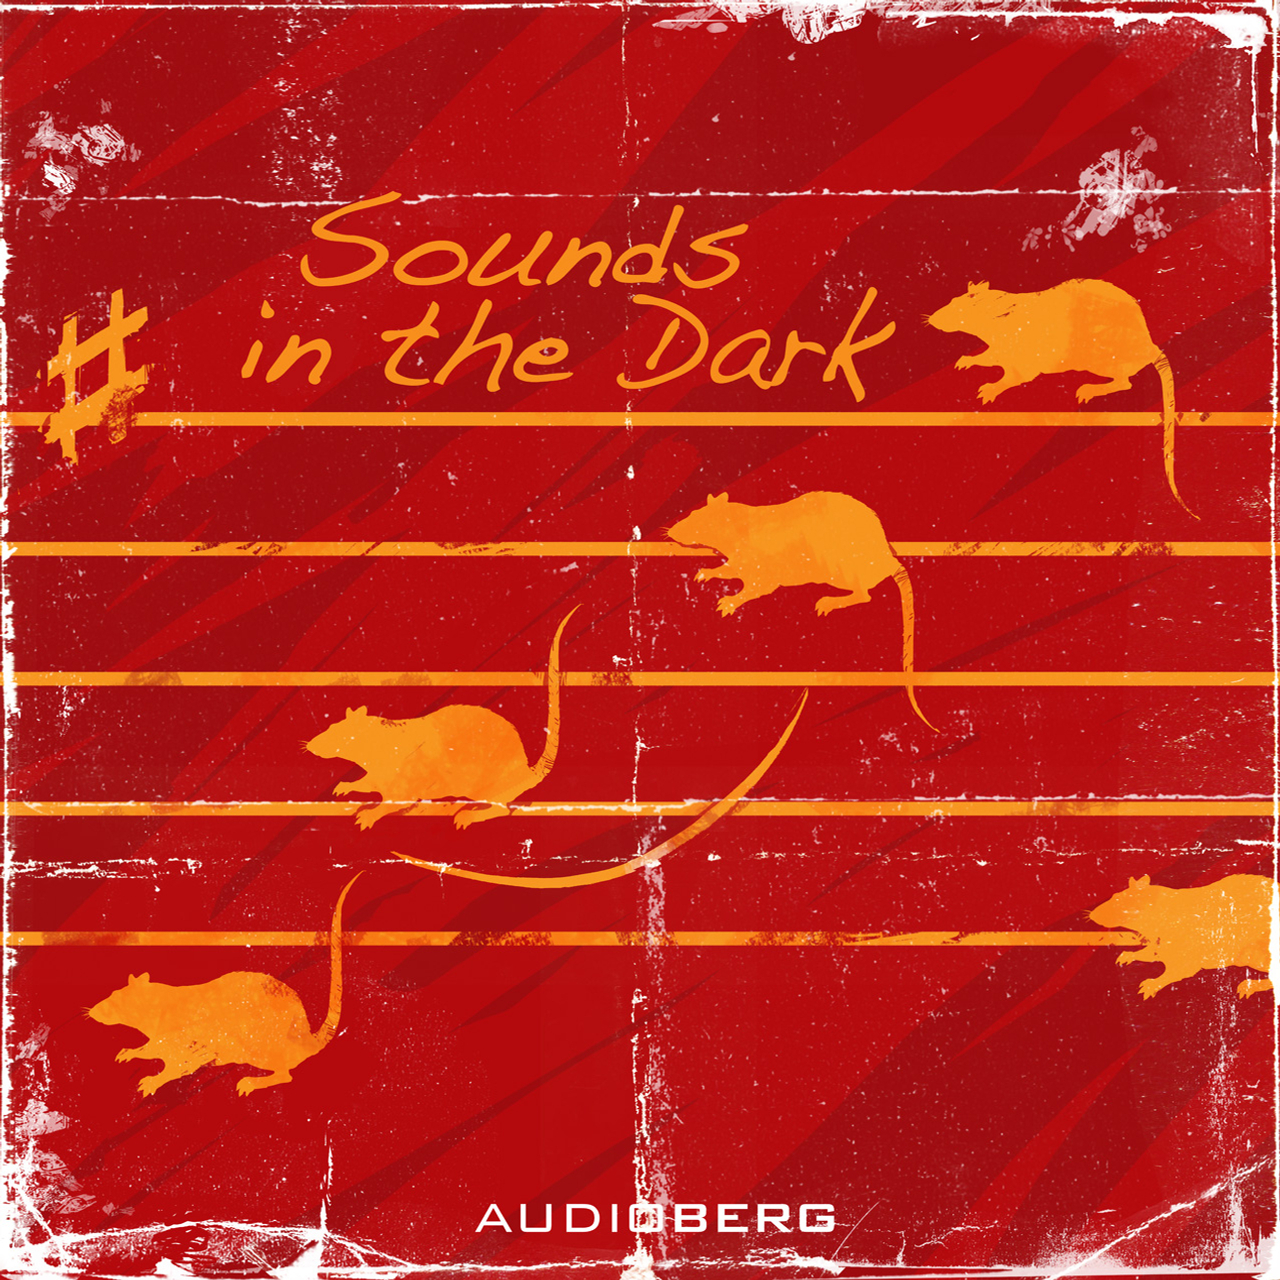 Sounds in the Dark